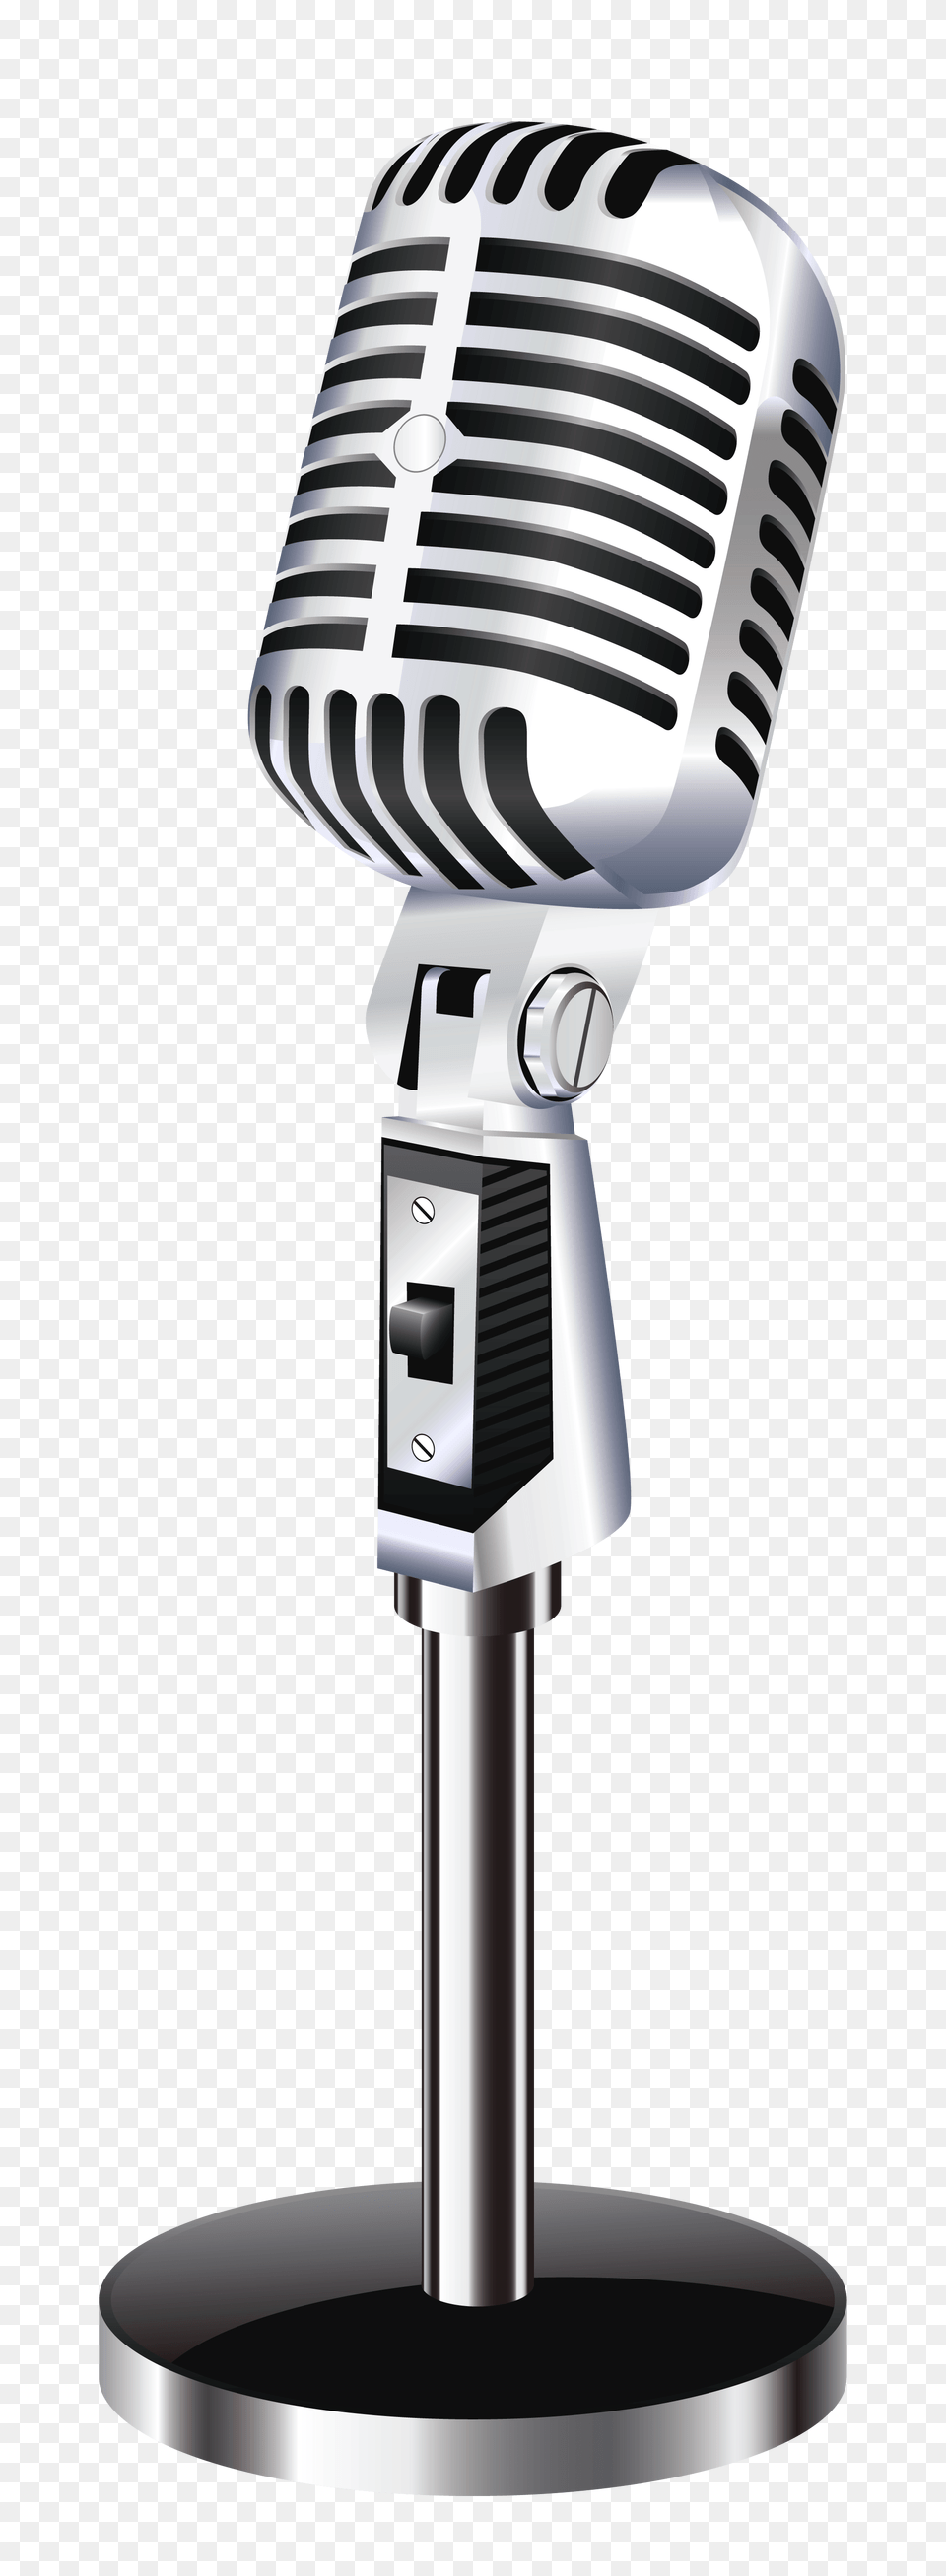 Microphone Images Download, Electrical Device, Smoke Pipe Free Transparent Png